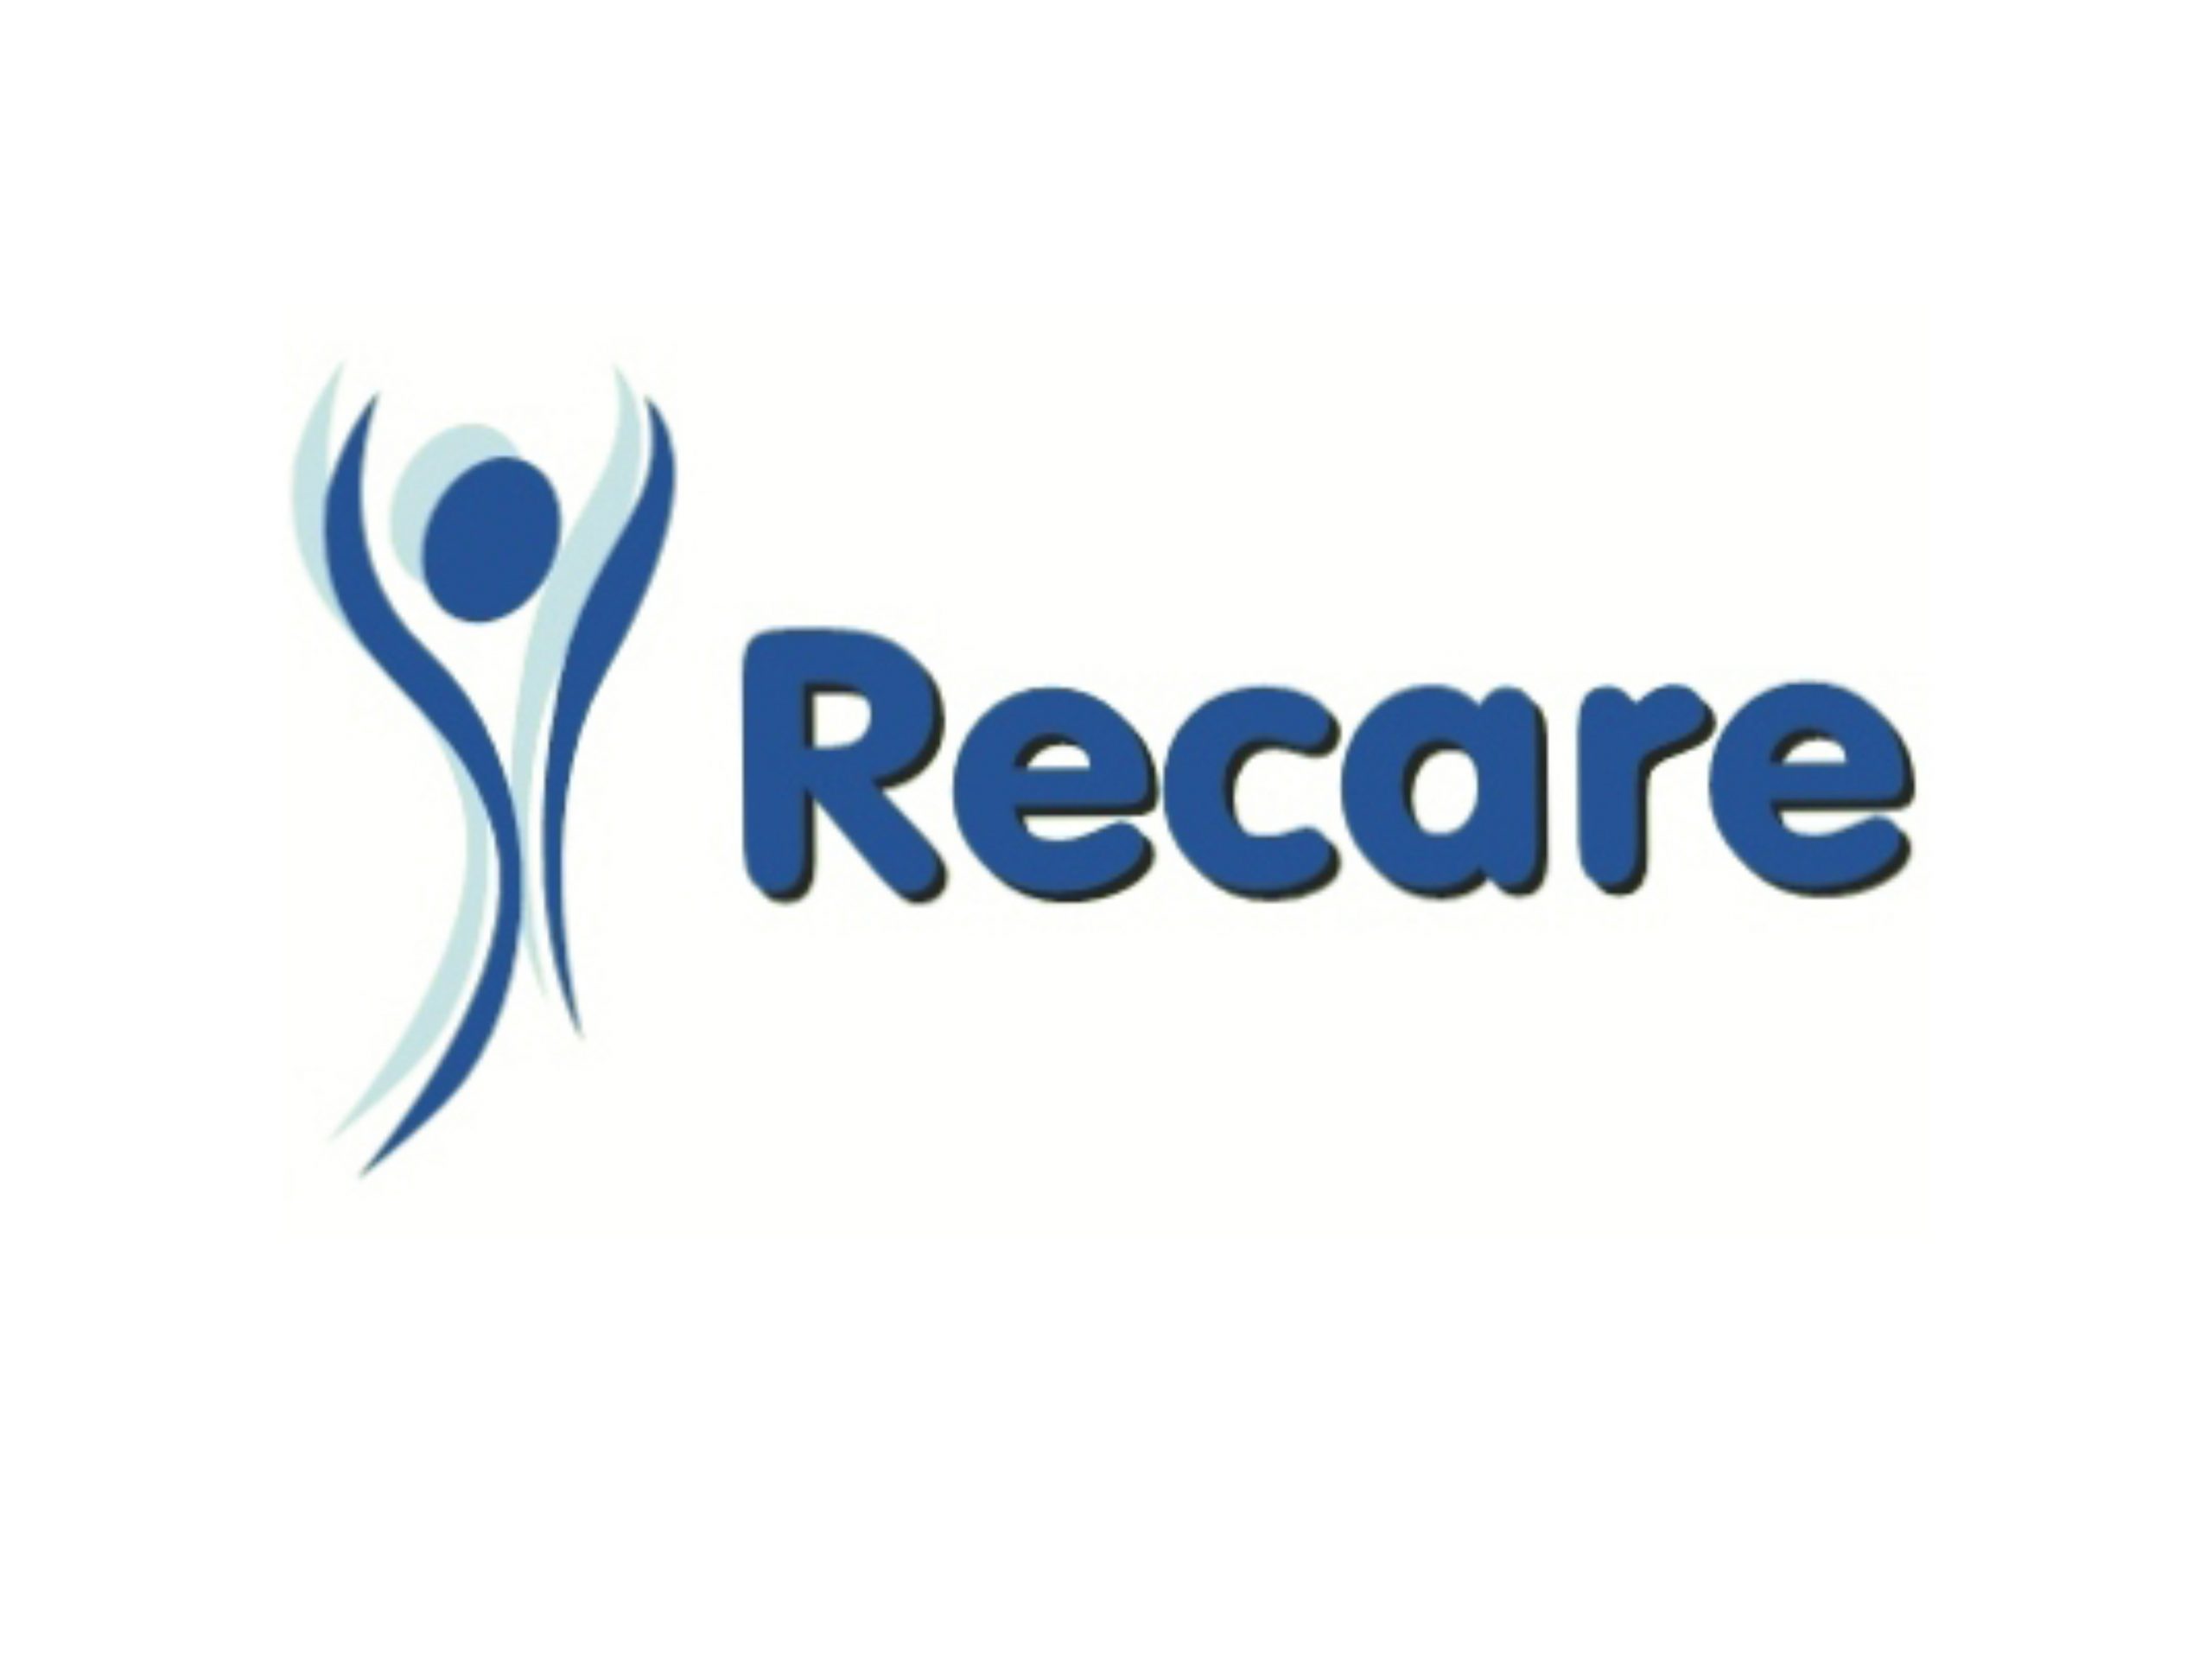 Recare returns to Kidz Middle with world-class wheelchairs & seating for disabled children